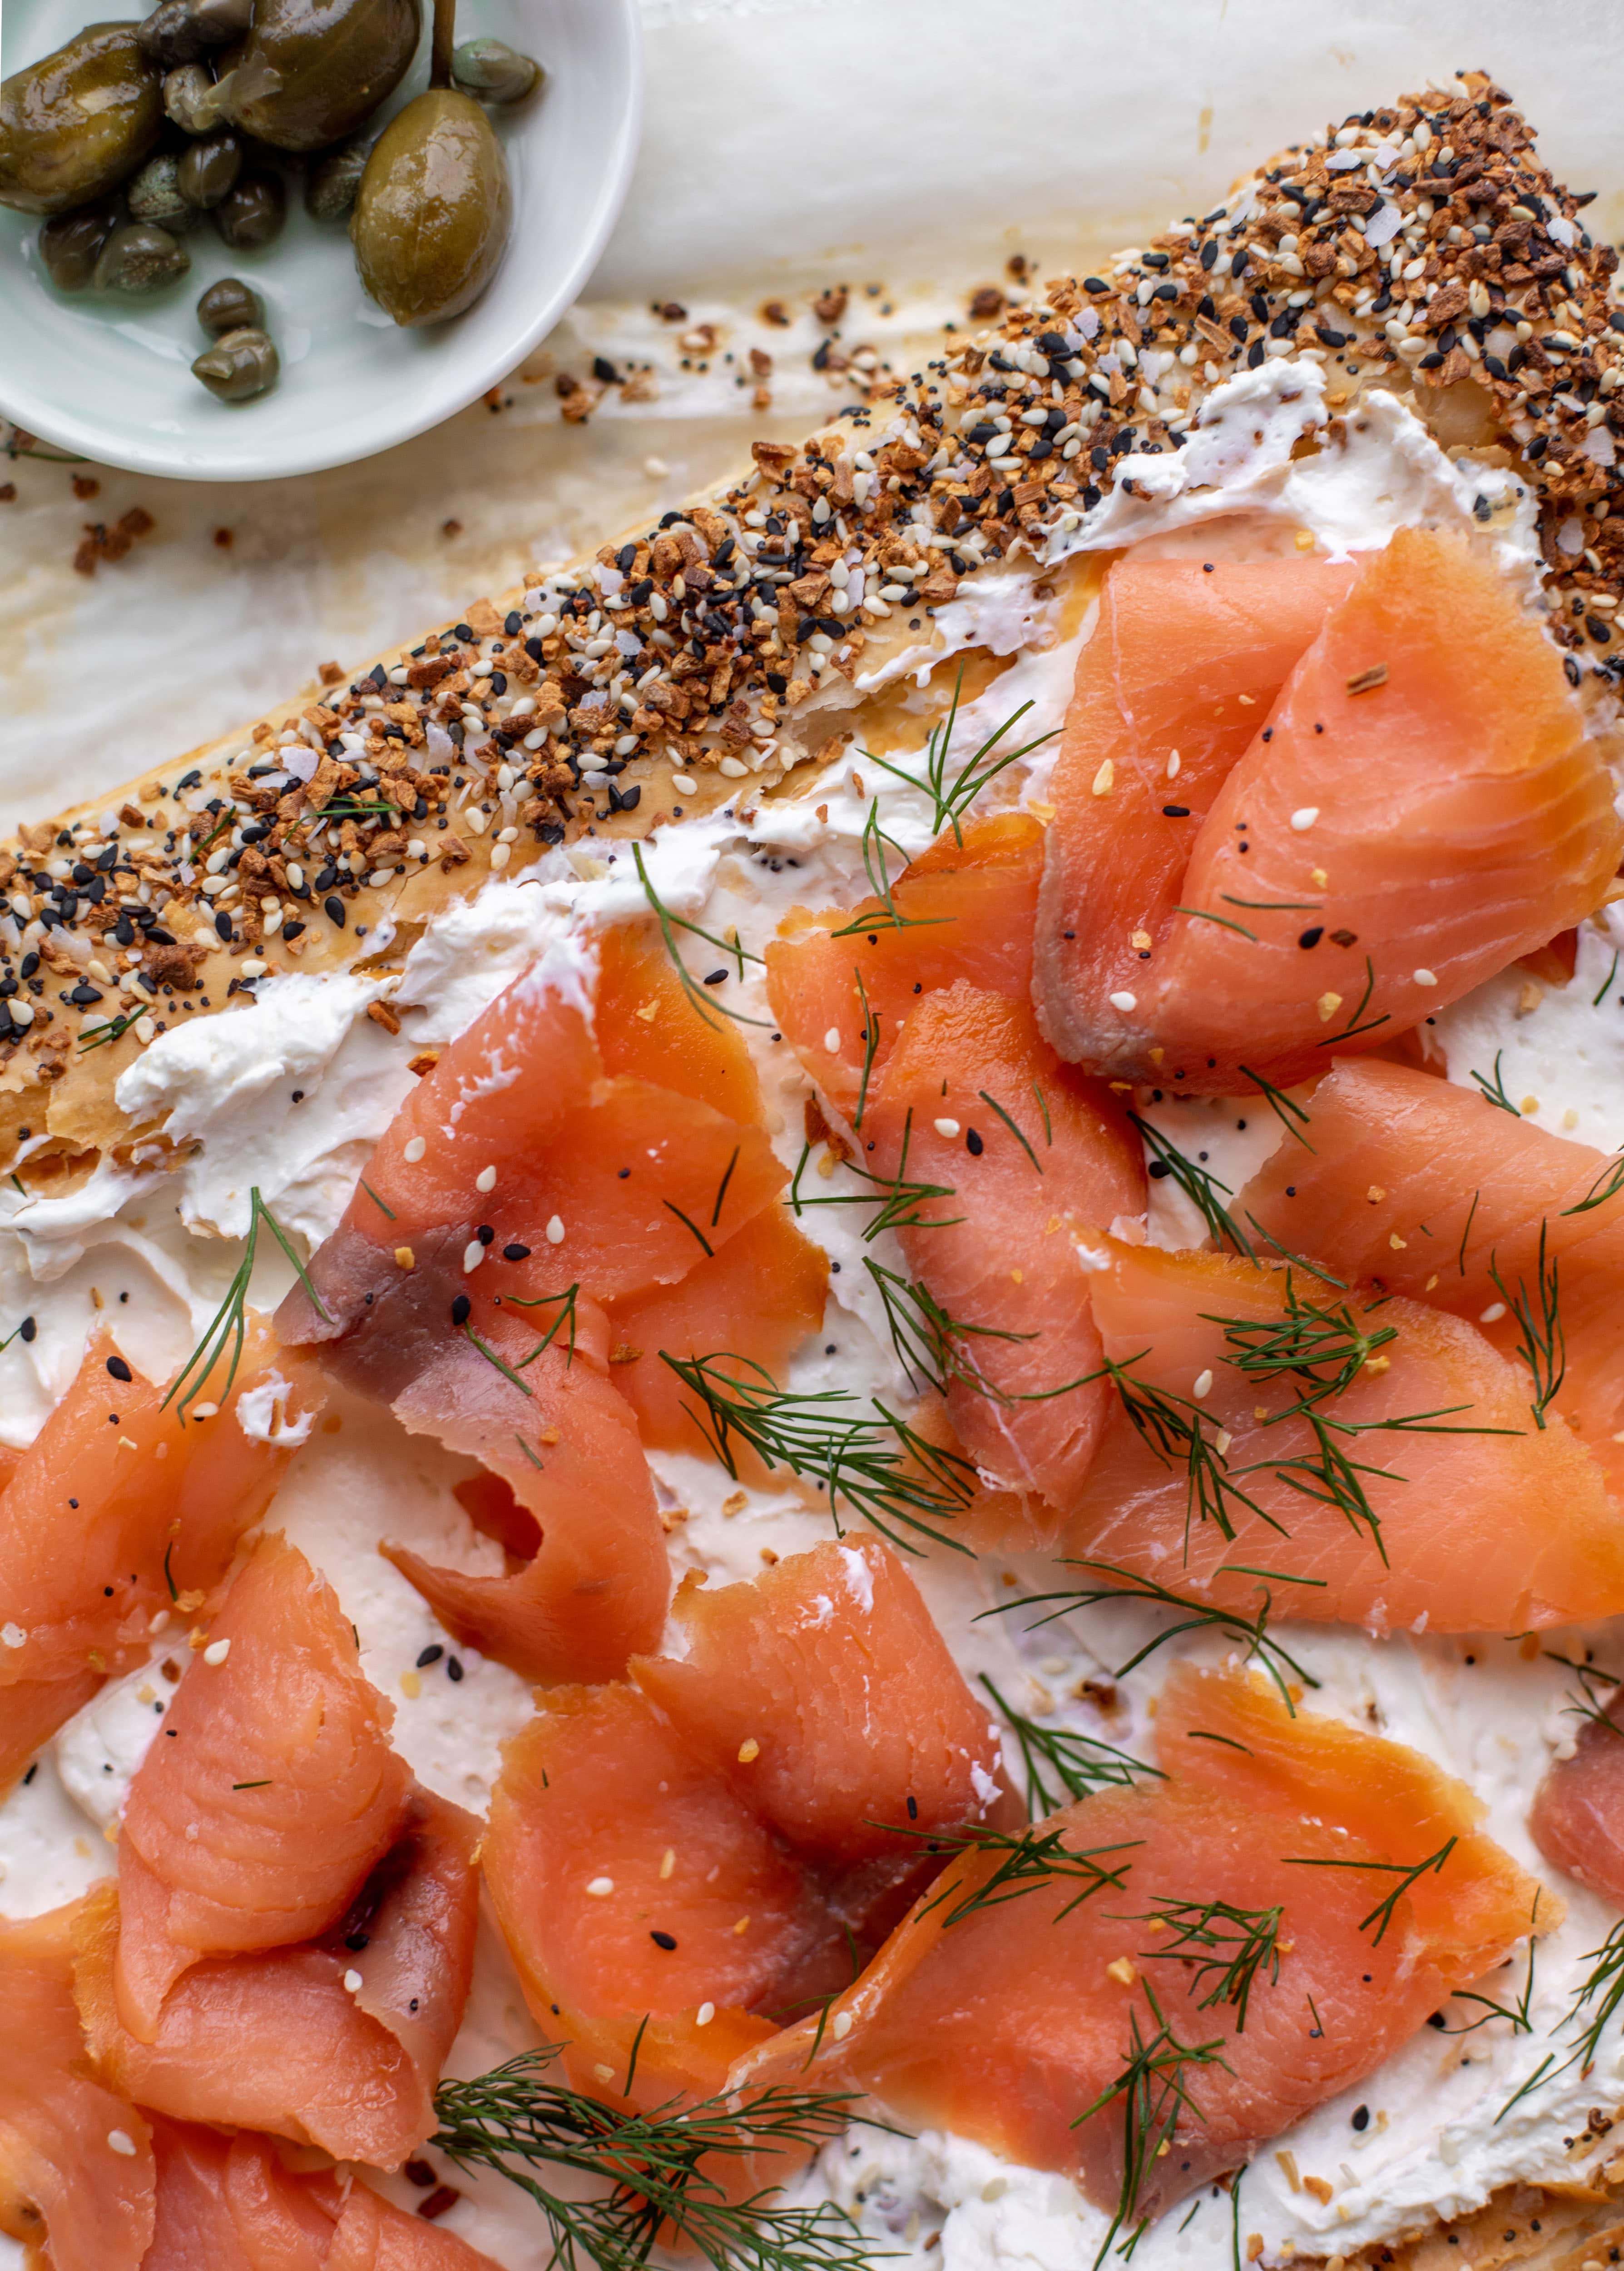 This everything smoked salmon tart is perfect for brunch! Puff pastry sprinkled with everything seasoning, slathered in cream cheese and topped with salmon.